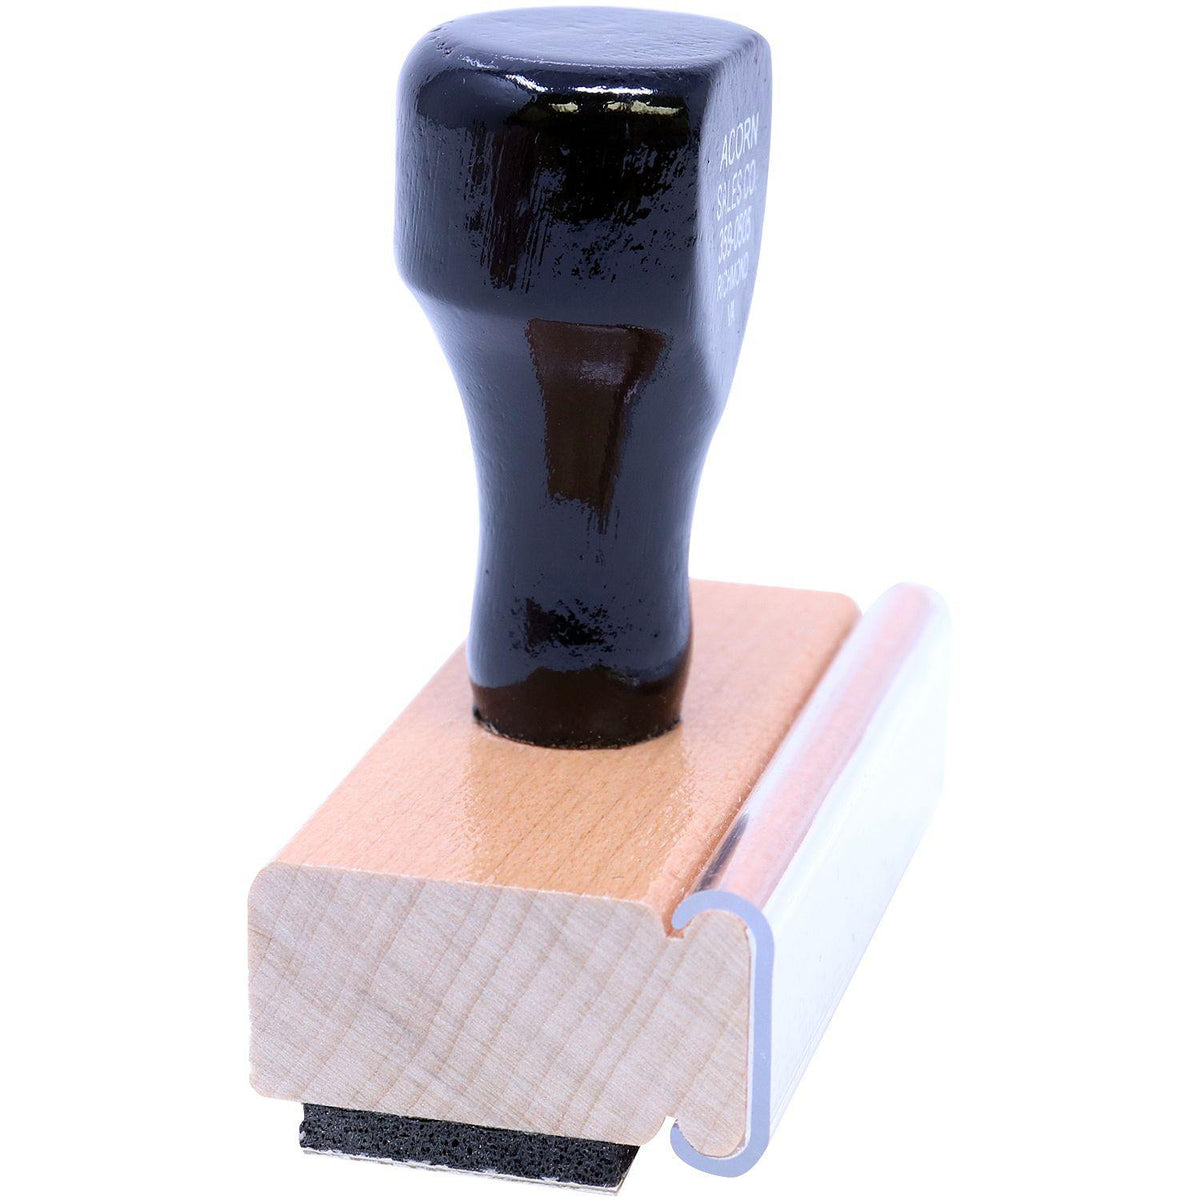 Side View of Terrific Effort Rubber Stamp at an Angle